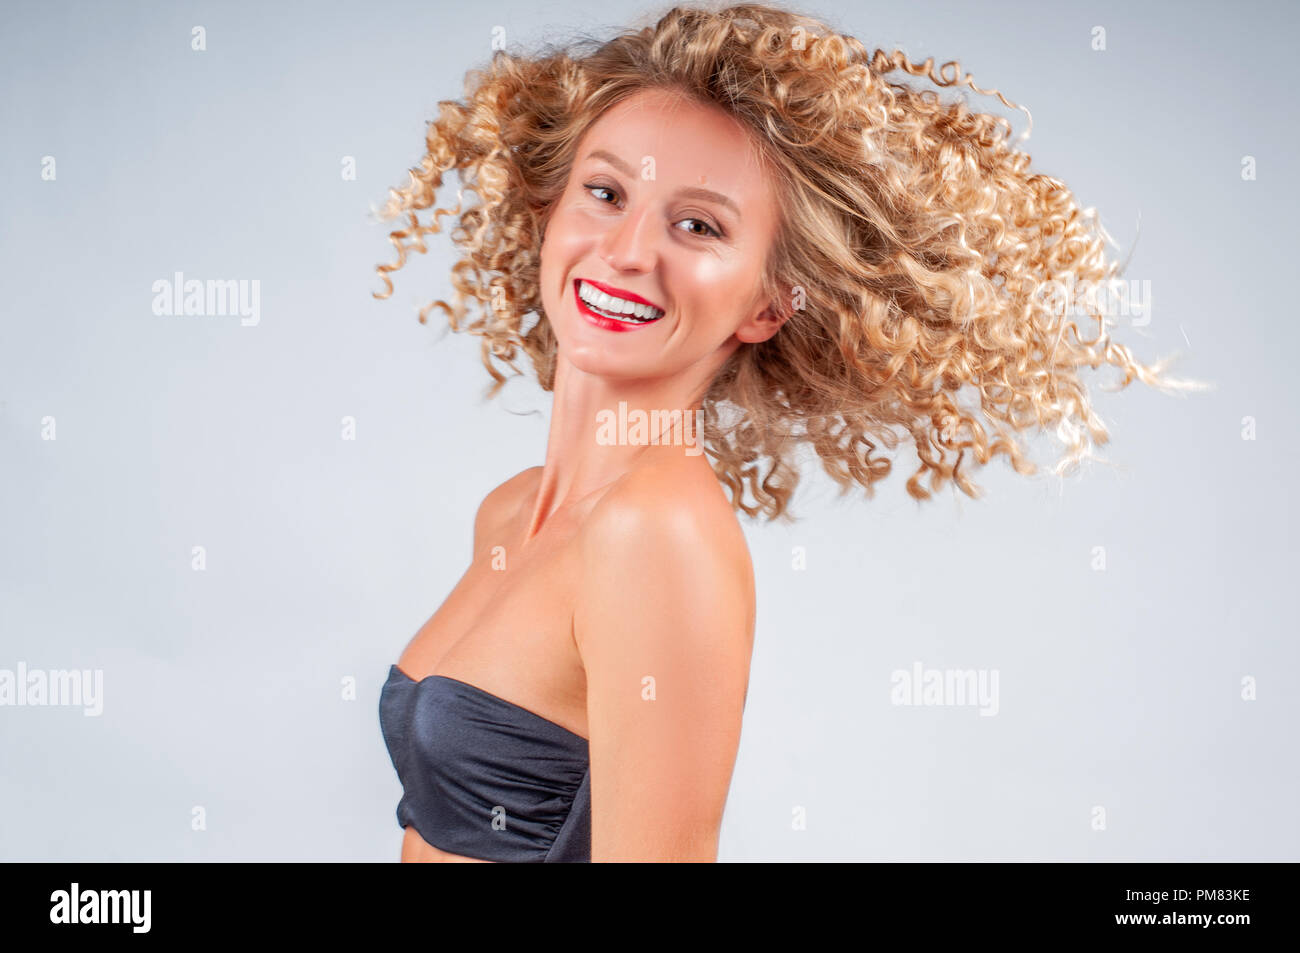 Happy Girl With Healthy Curly Hair Beautiful Woman With Wavy